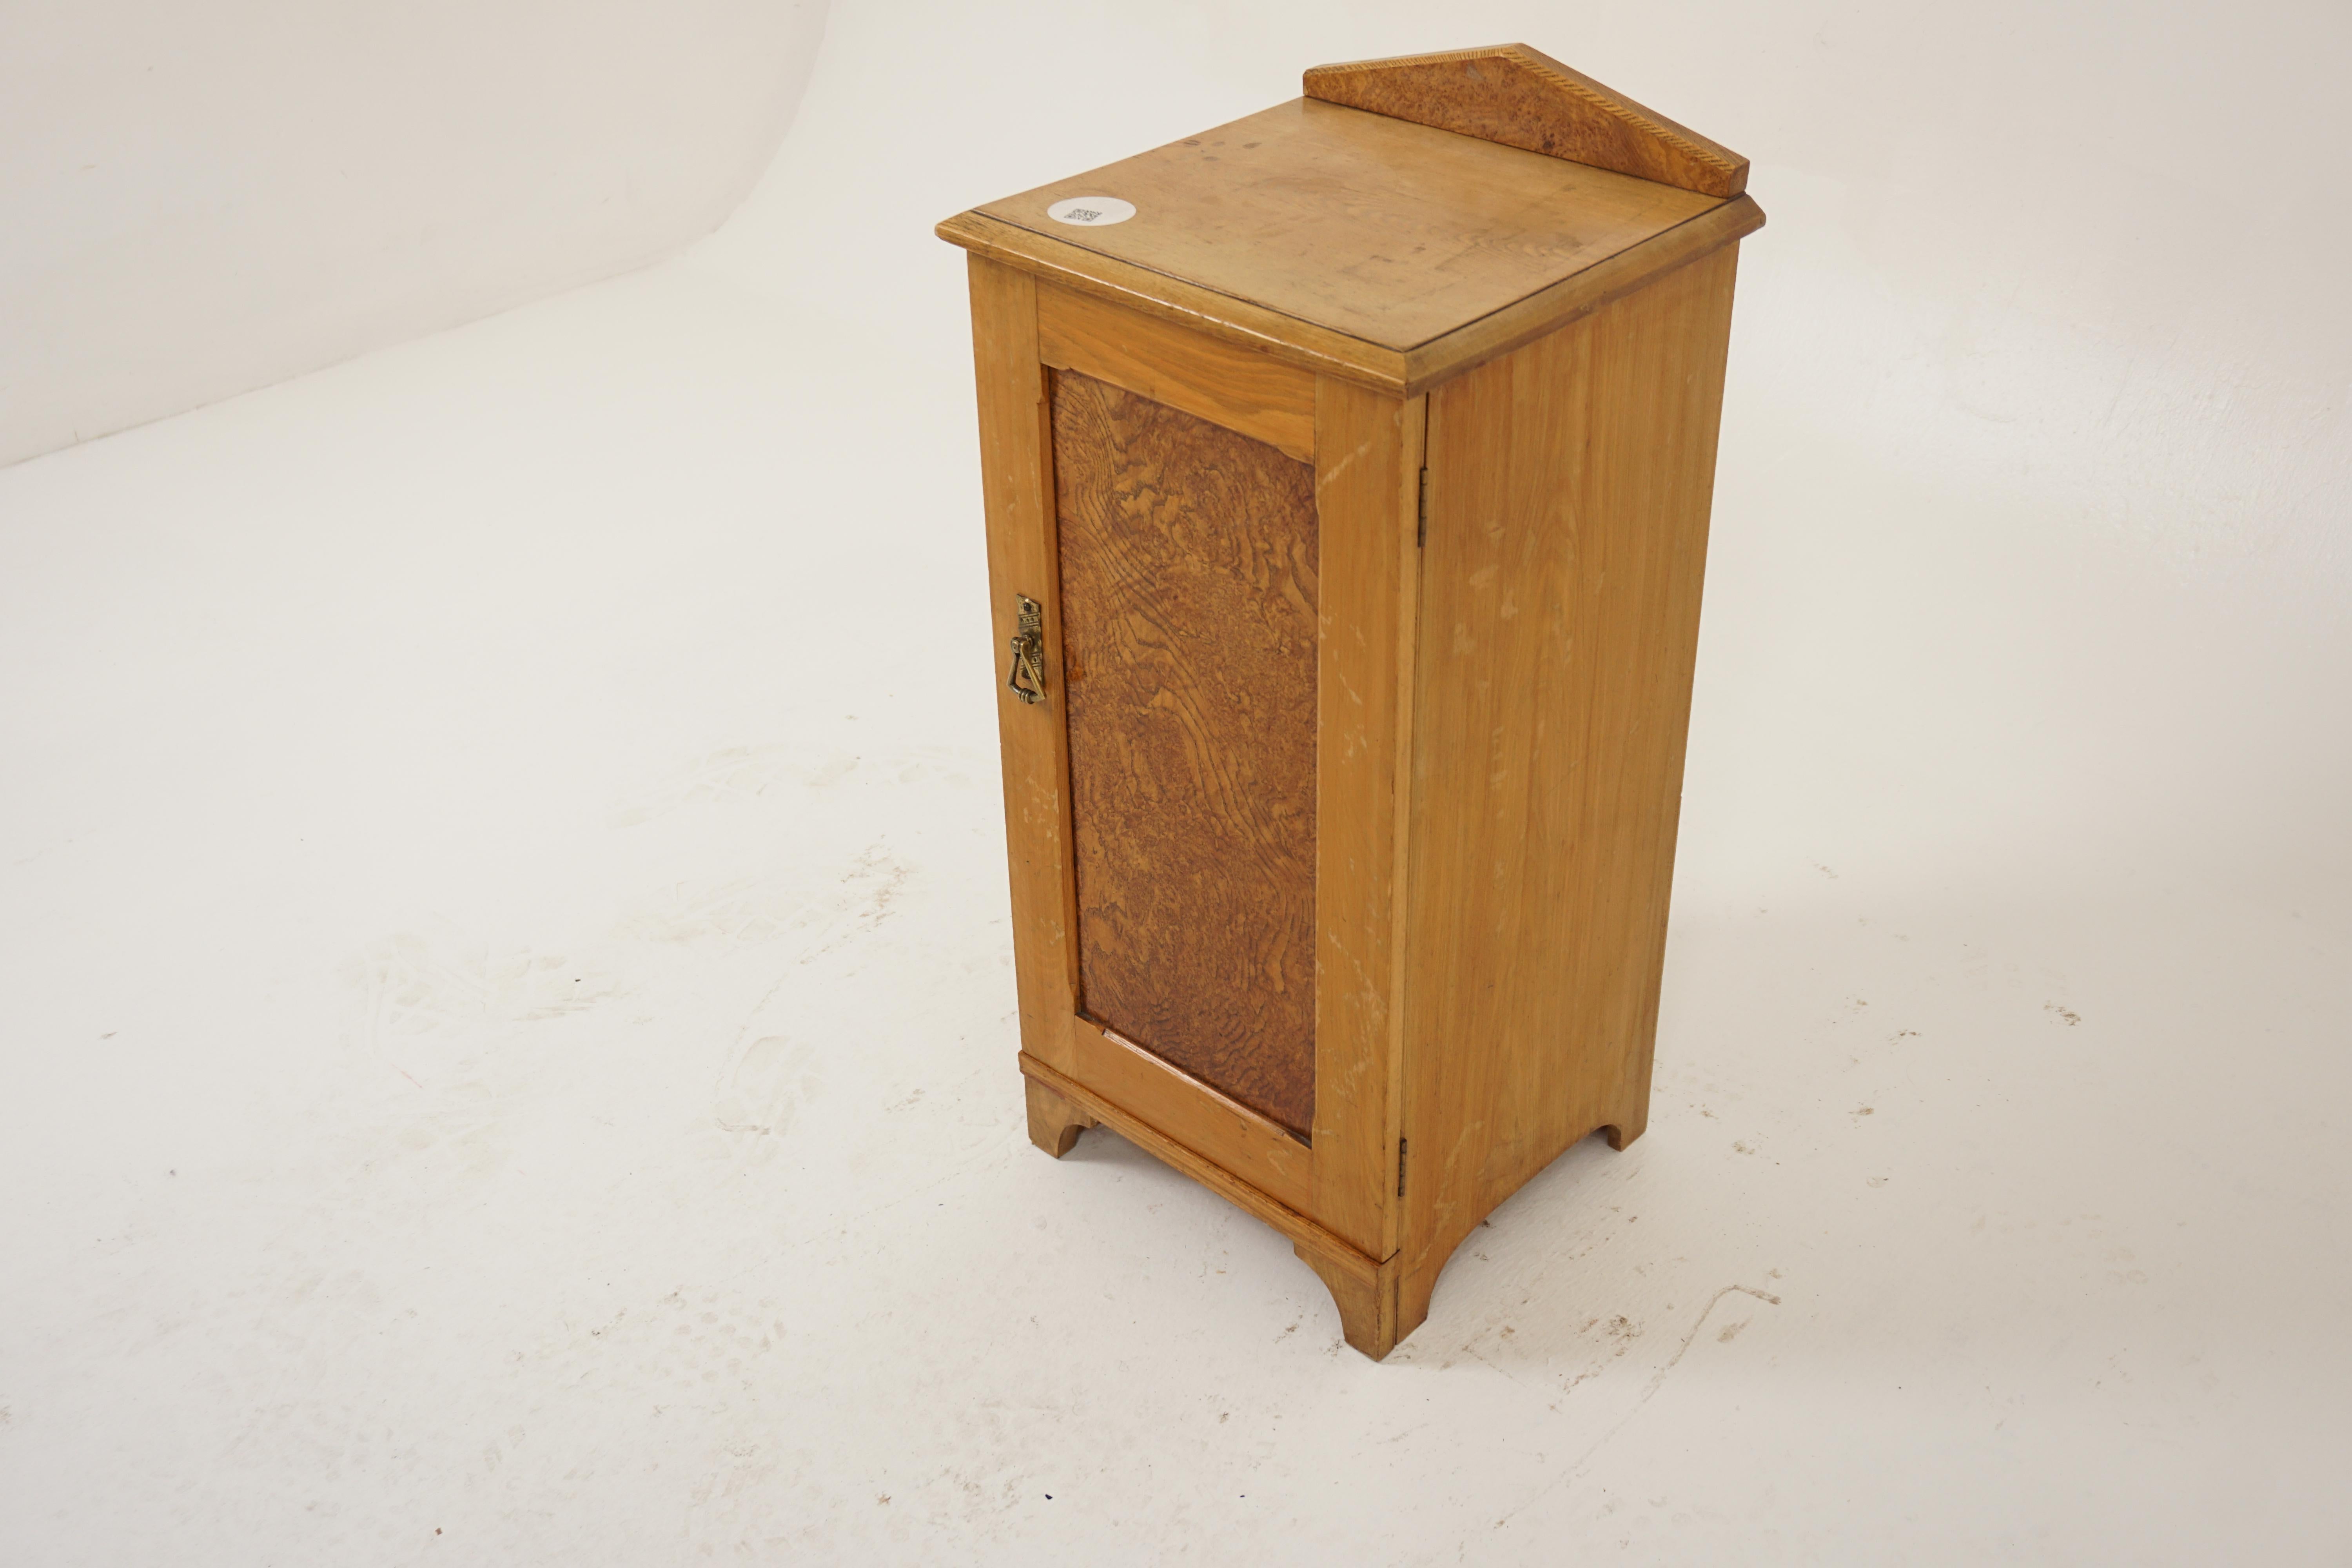 Antique Ash Nightstand, Victorian Bedside Lamp Table, Antique Furniture, Scotland 1880, H1072

+ Scotland 1880
+ Solid Ash and Veneer
+ Original Finish
+ Rectangular moulded top
+ Raised gallery on back with brass walnut vaneer
+ Single